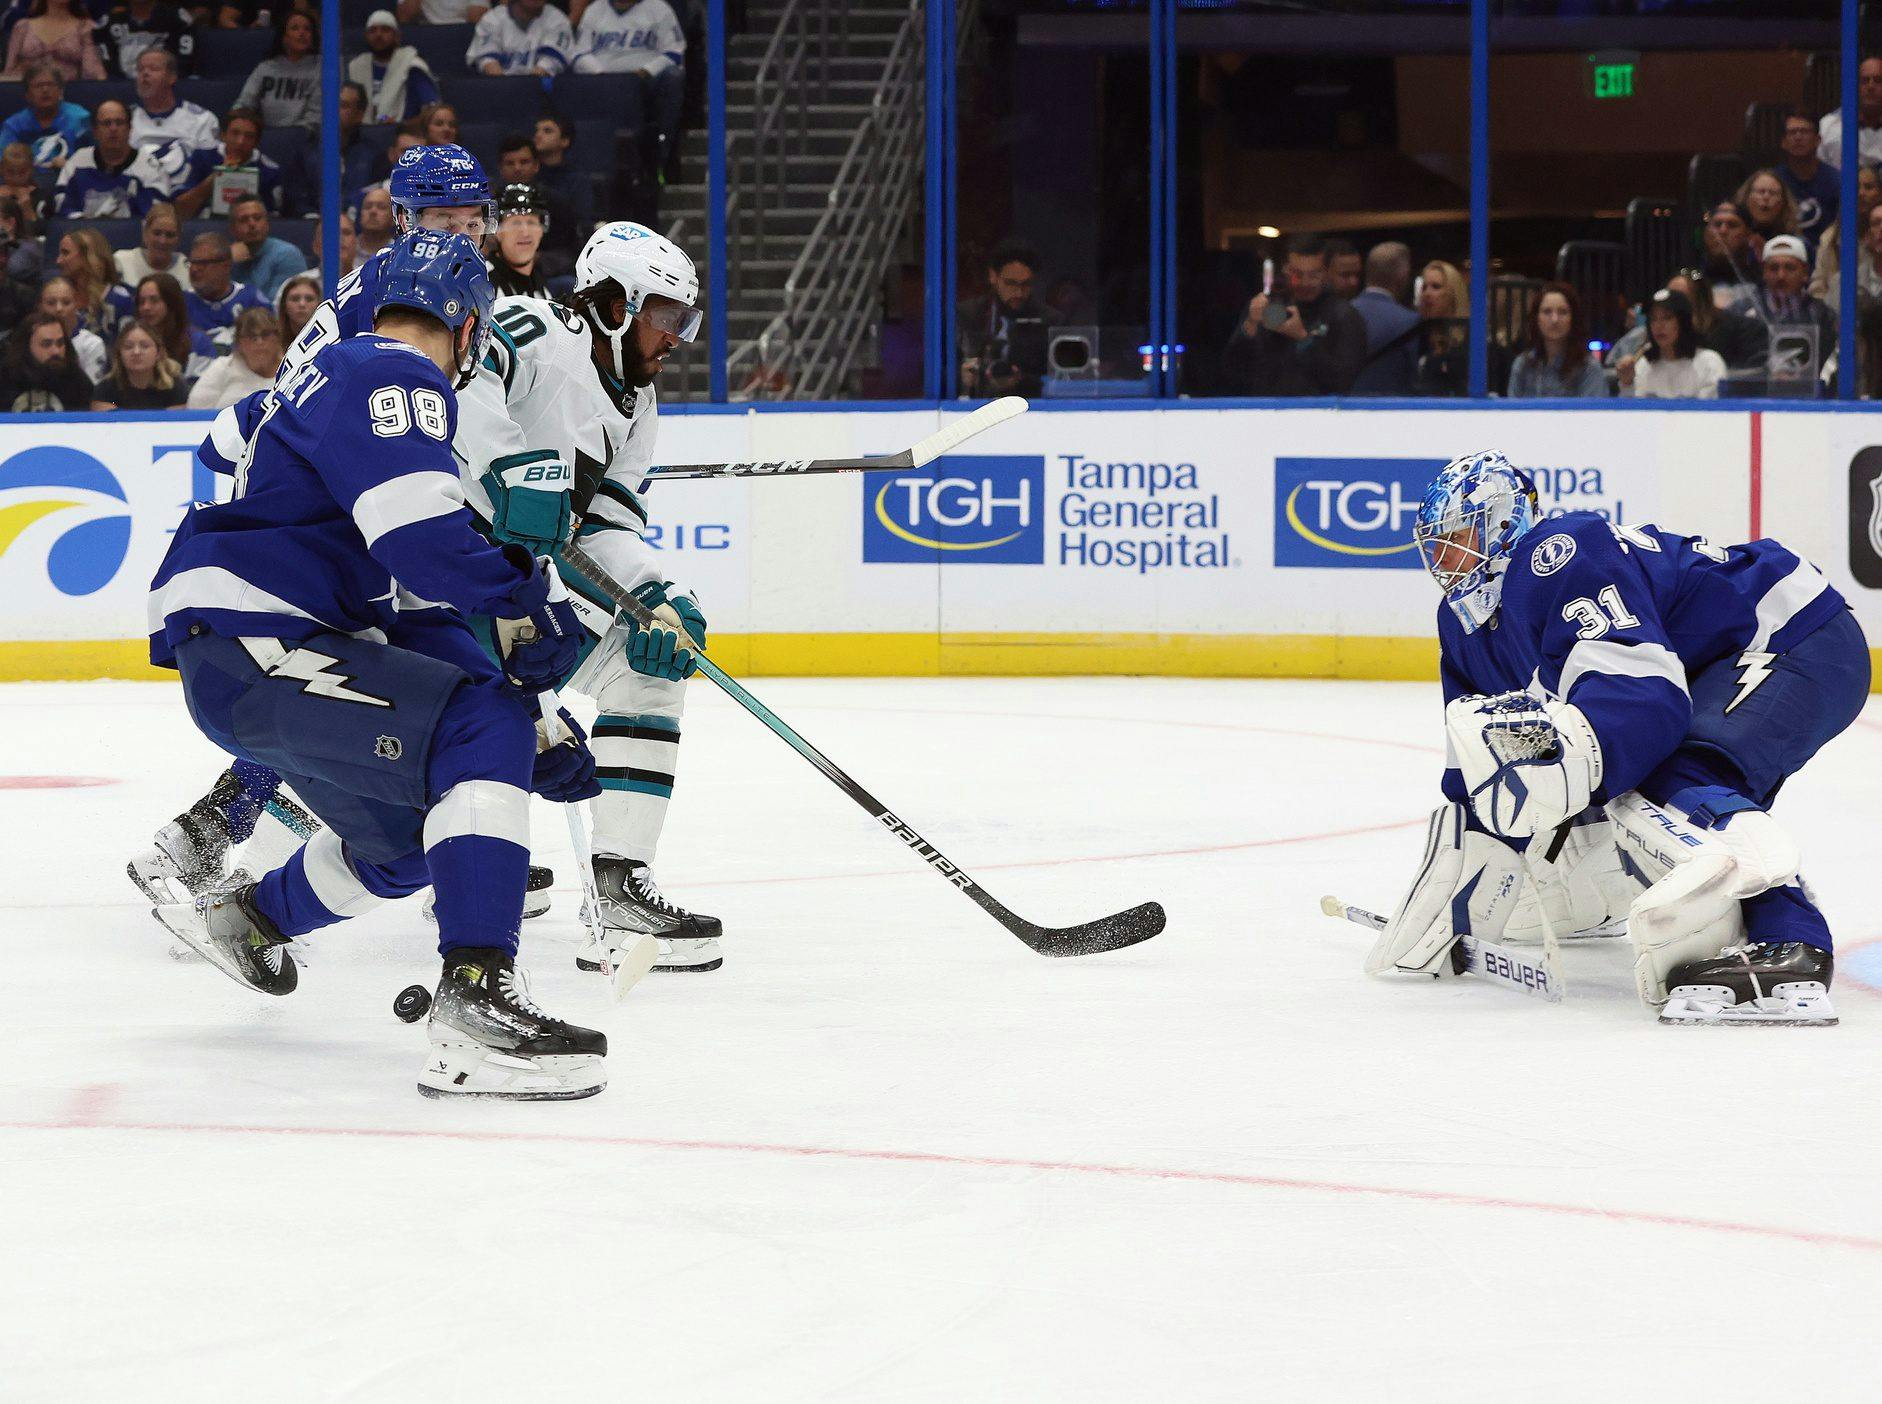 Tampa Bay Lightning acquire Anthony Duclair from San Jose Sharks